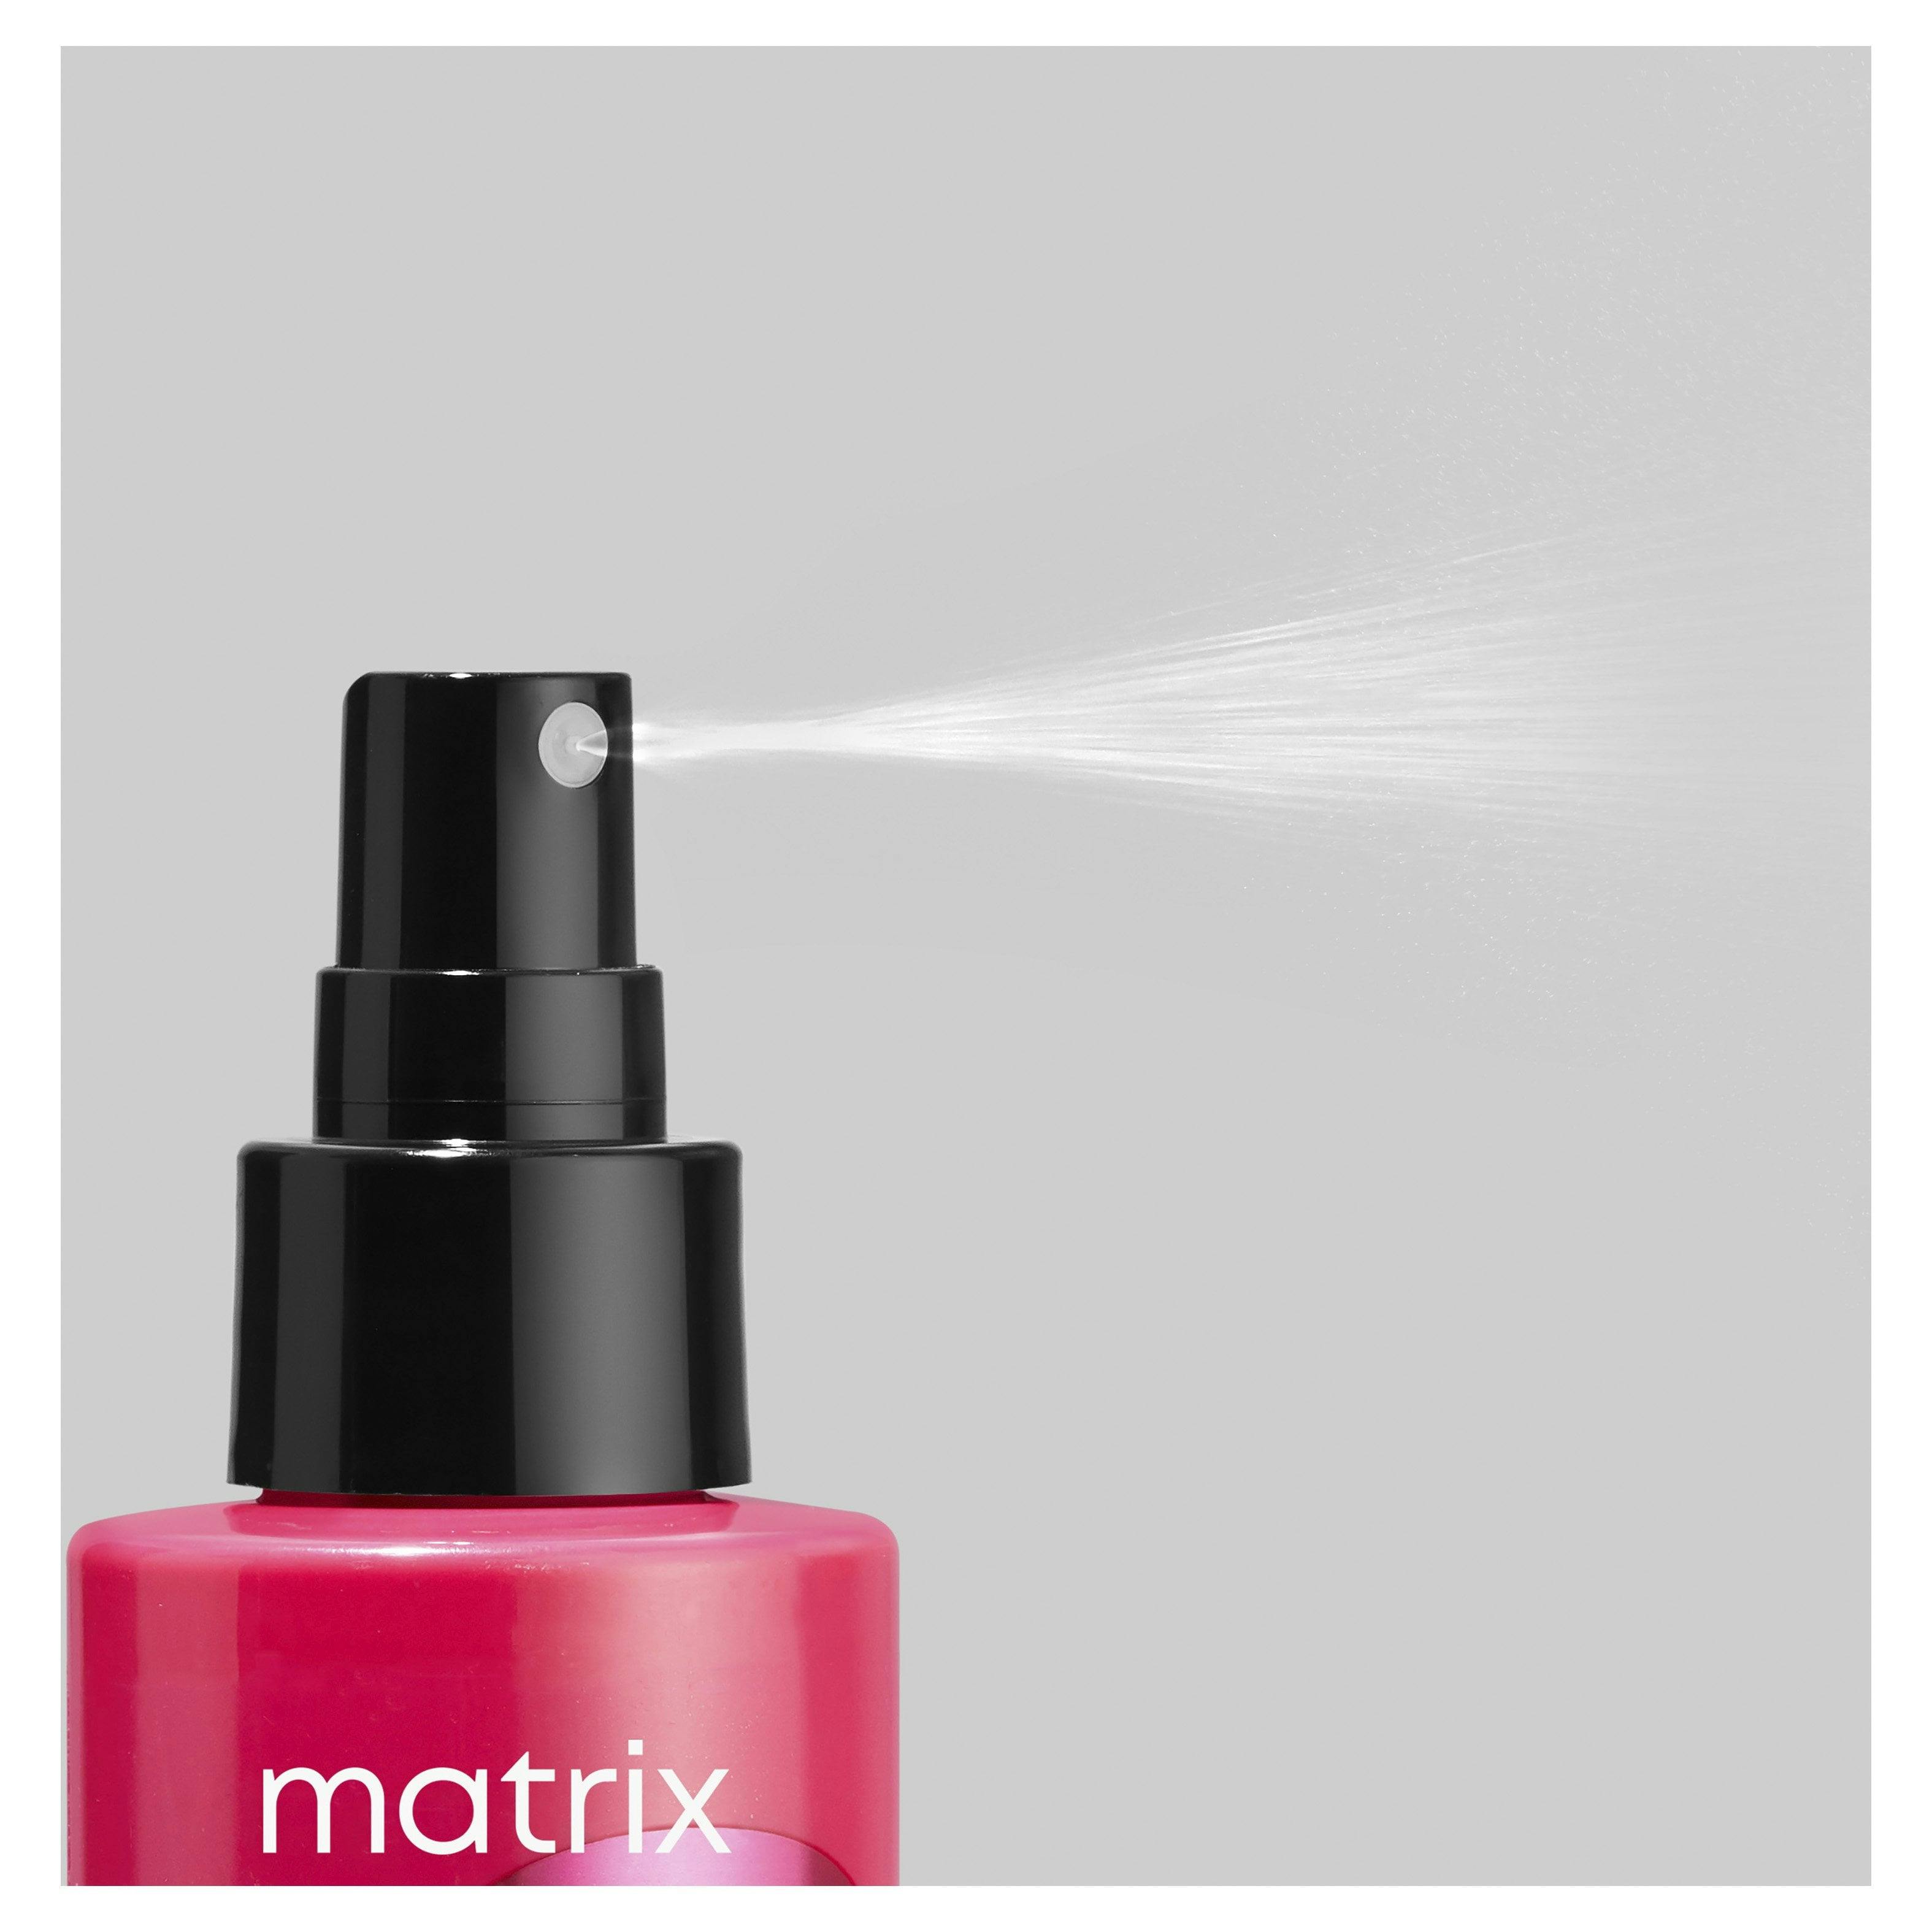 Matrix Total Results Everyday Miracles Miracle Creator 200ml